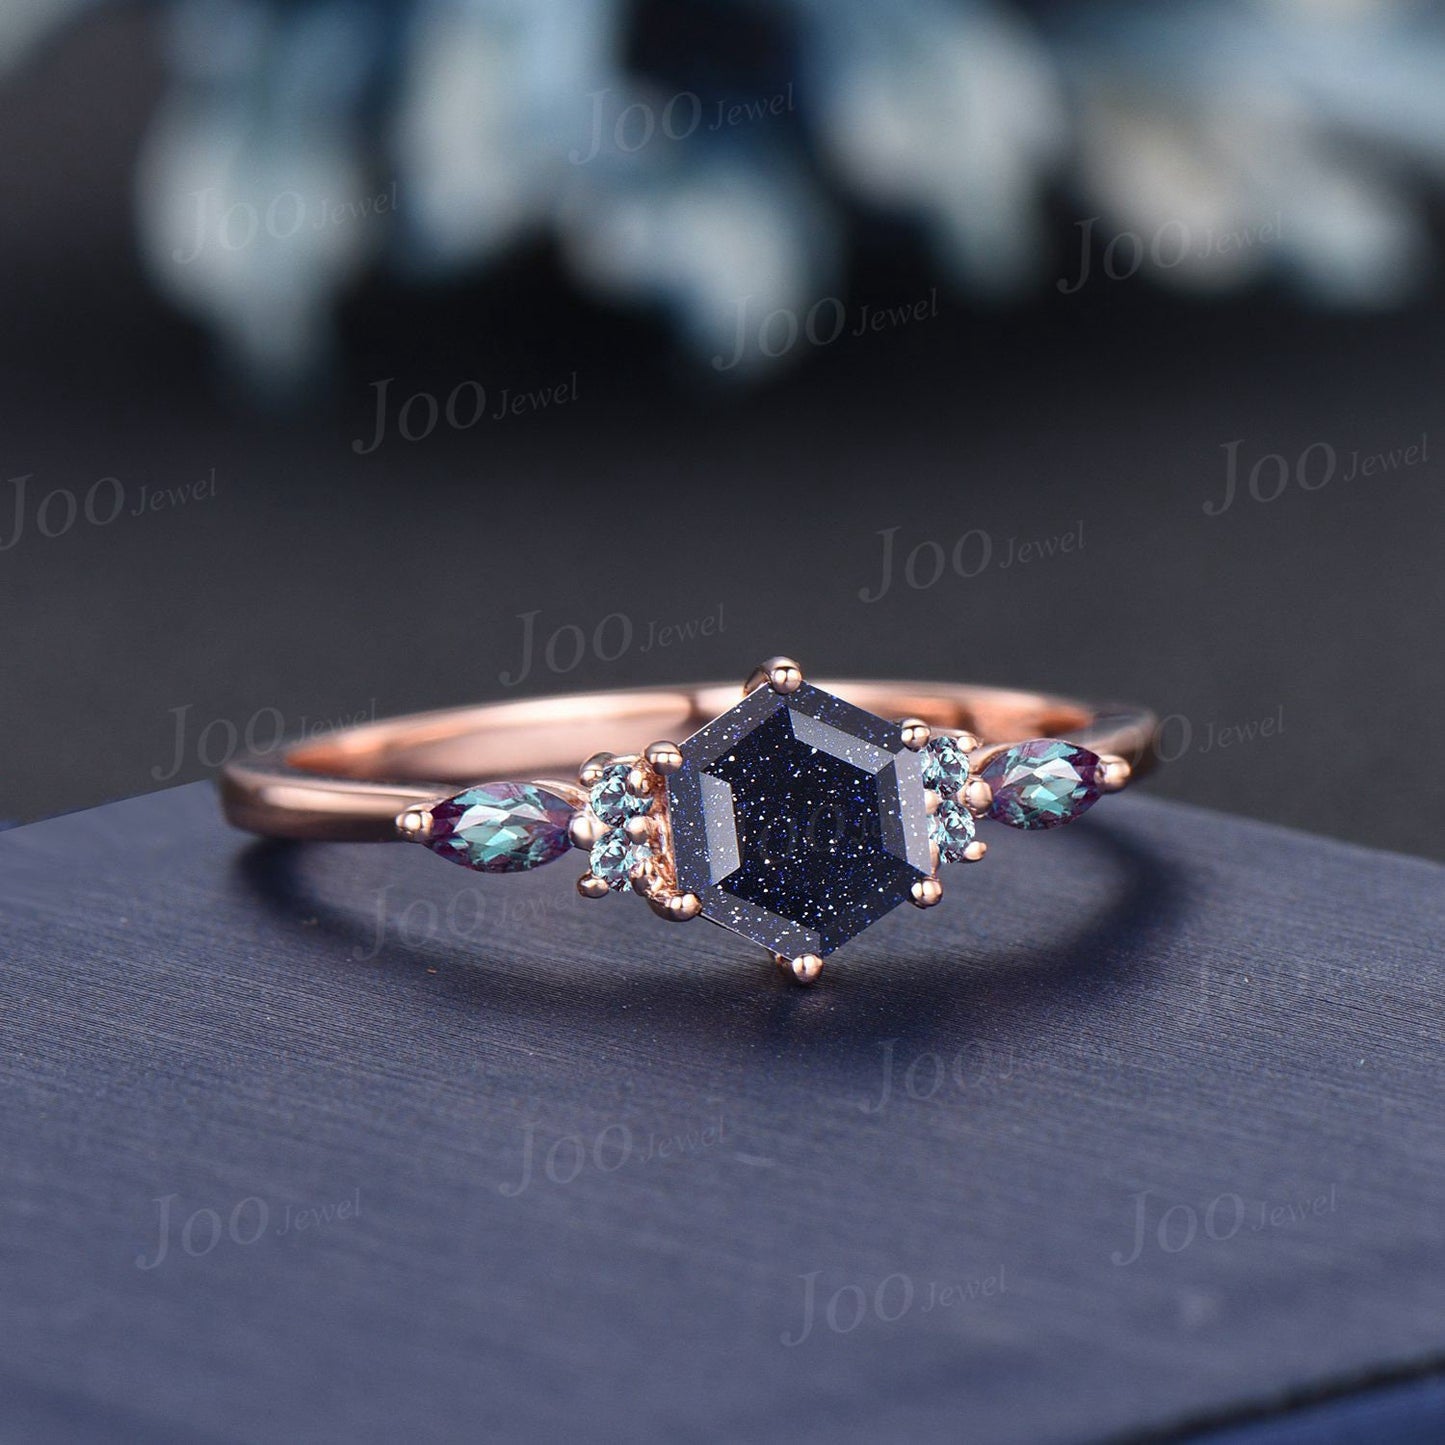 1ct Hexagon Galaxy Blue Sandstone Engagement Ring Vintage Color-Change Alexandrite Wedding Ring Unique Anniversary/Proposal Gift For Women